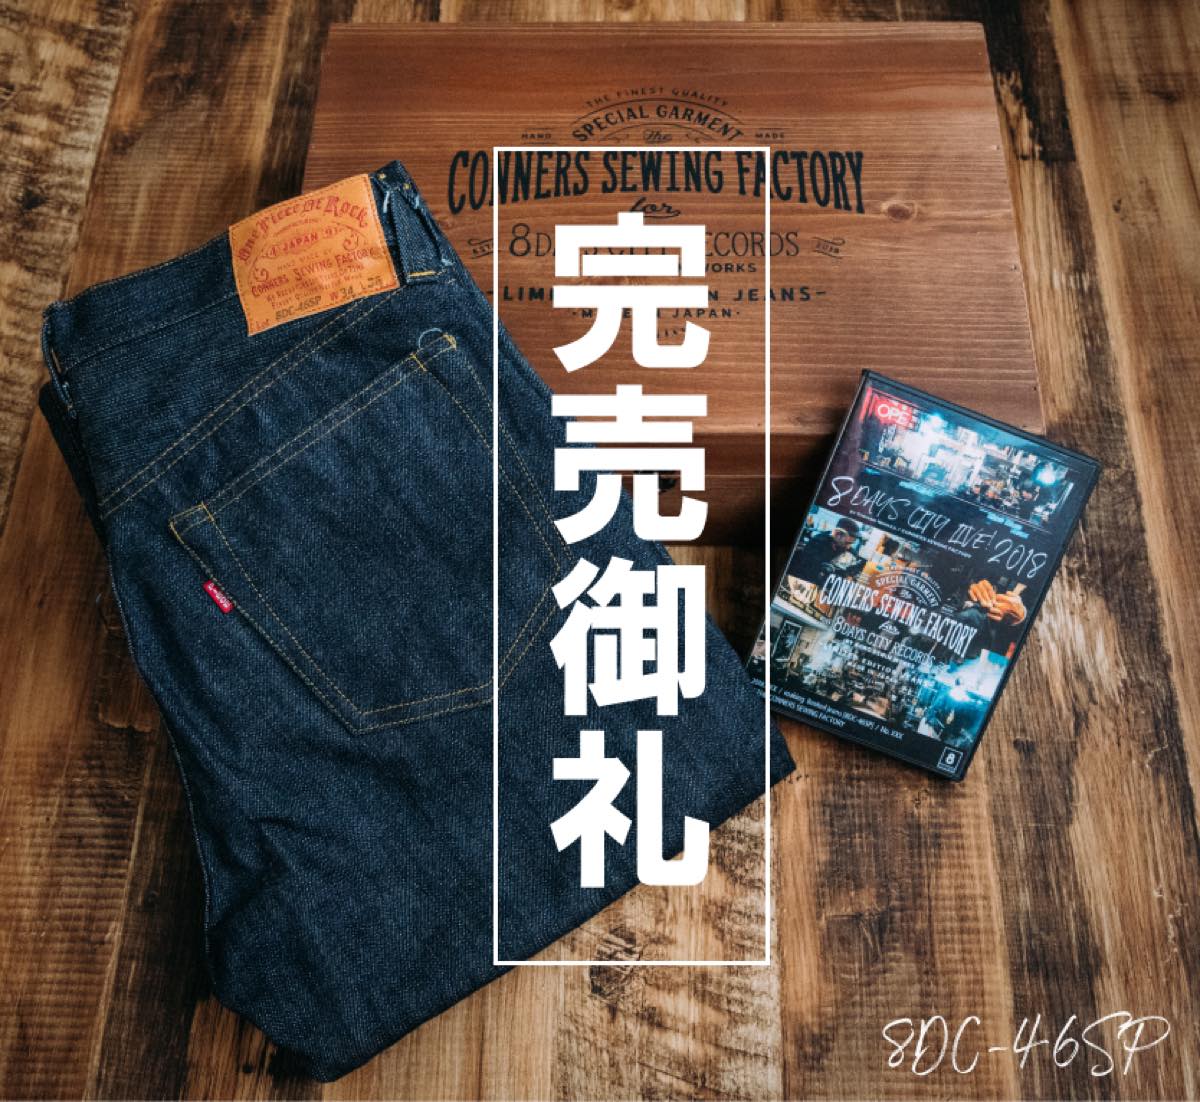 8days city project - csf - limited jeans 8DC-46SP